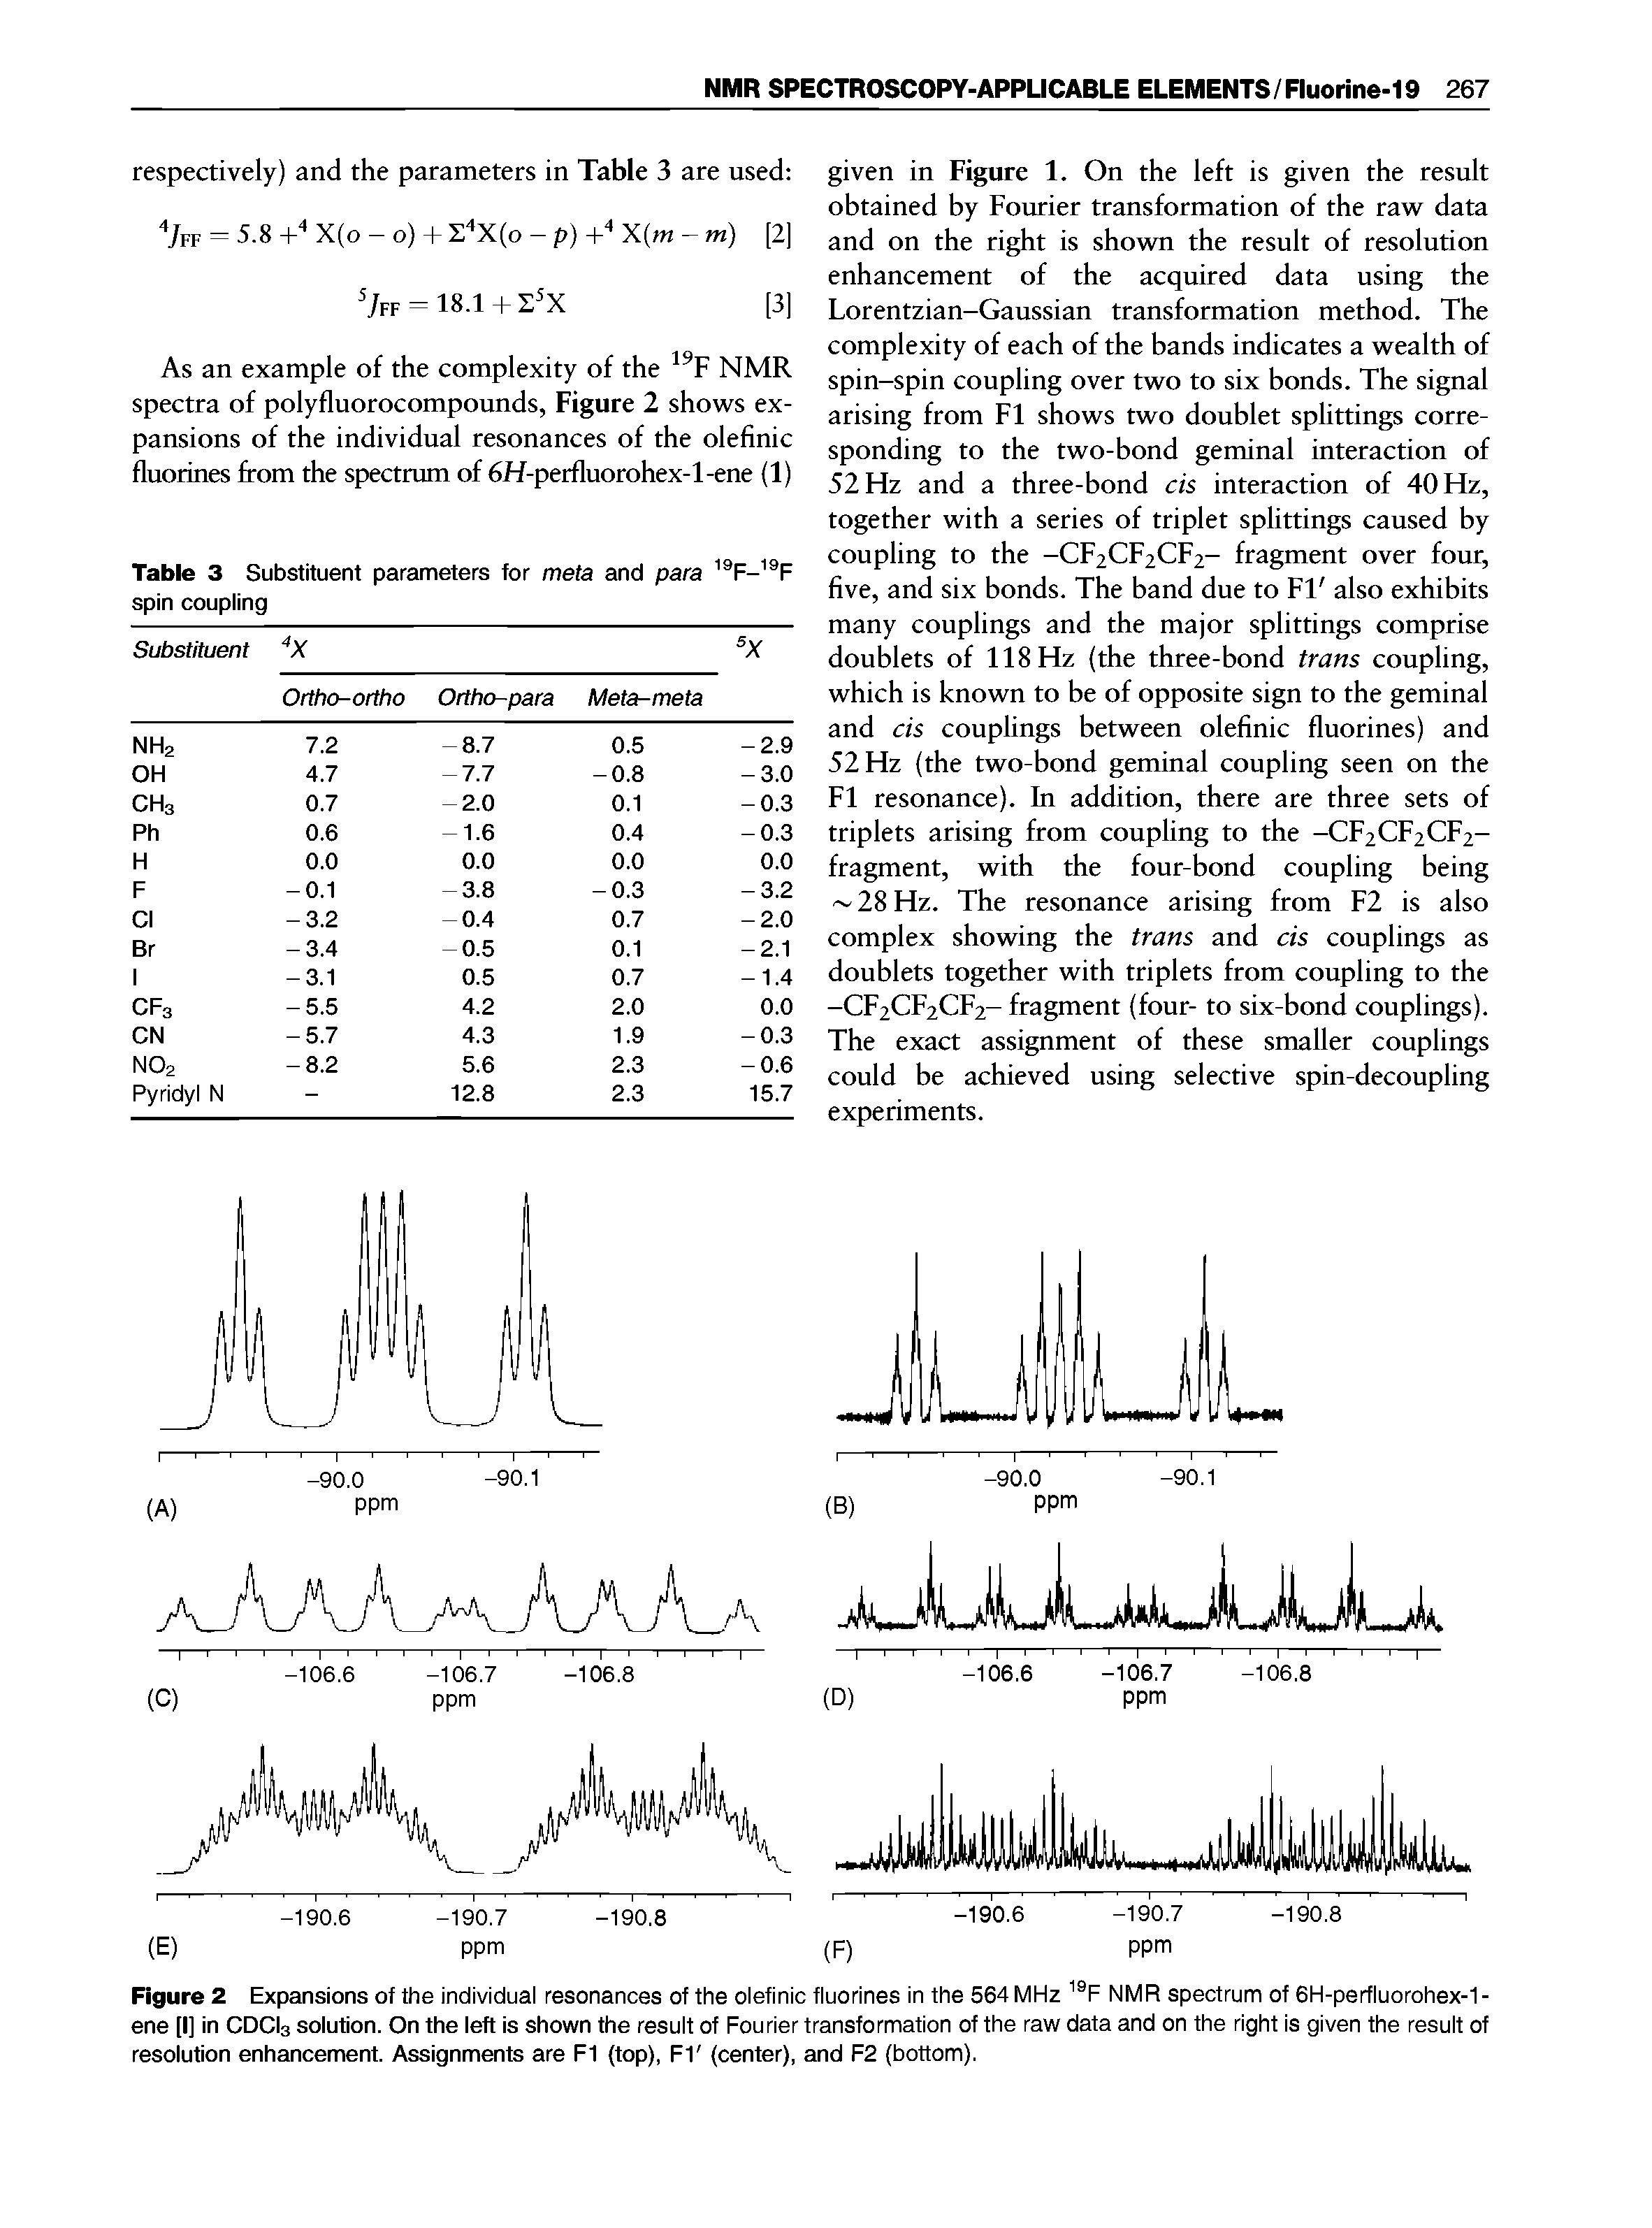 Figure 2 Expansions of the individual resonances of the olefinic fluorines in the 564 MHz F NMR spectrum of 6H-perfluorohex-1-ene [I] in CDCI3 solution. On the left is shown the result of Fourier transformation of the raw data and on the right Is given the result of resolution enhancement. Assignments are FI (top), FI (center), and F2 (bottom).